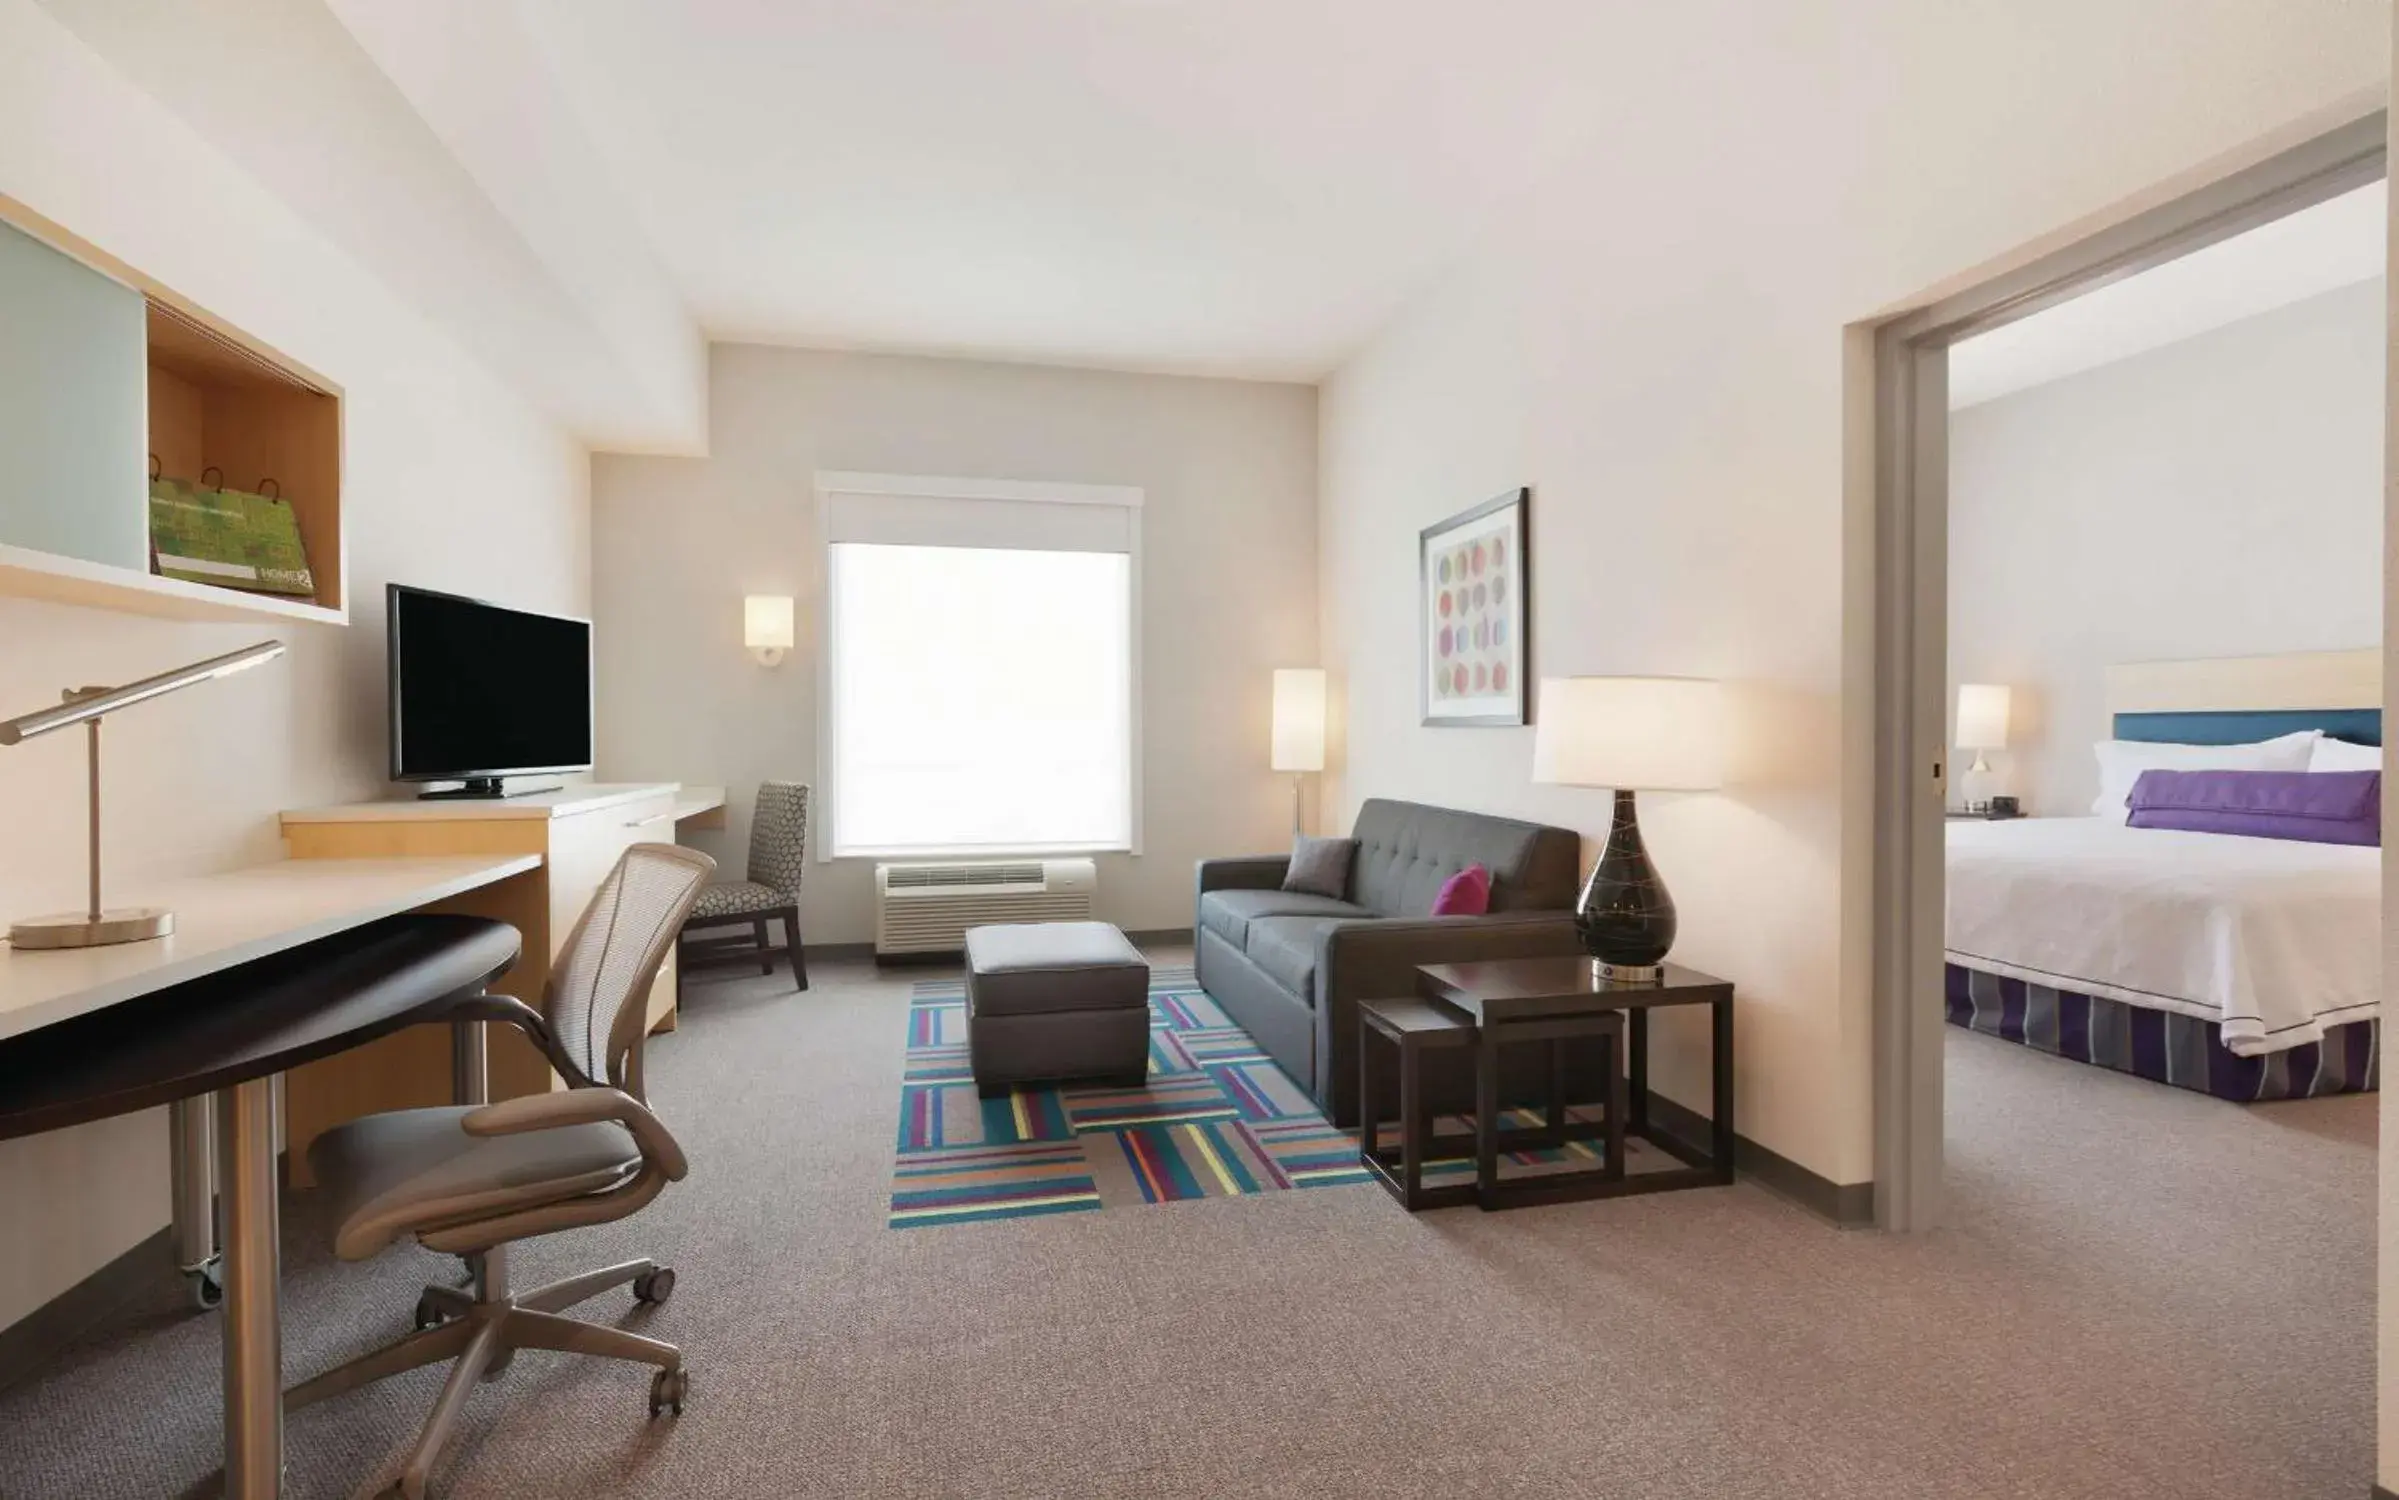 Bedroom, TV/Entertainment Center in Home2 Suites by Hilton Austin North/Near the Domain, TX